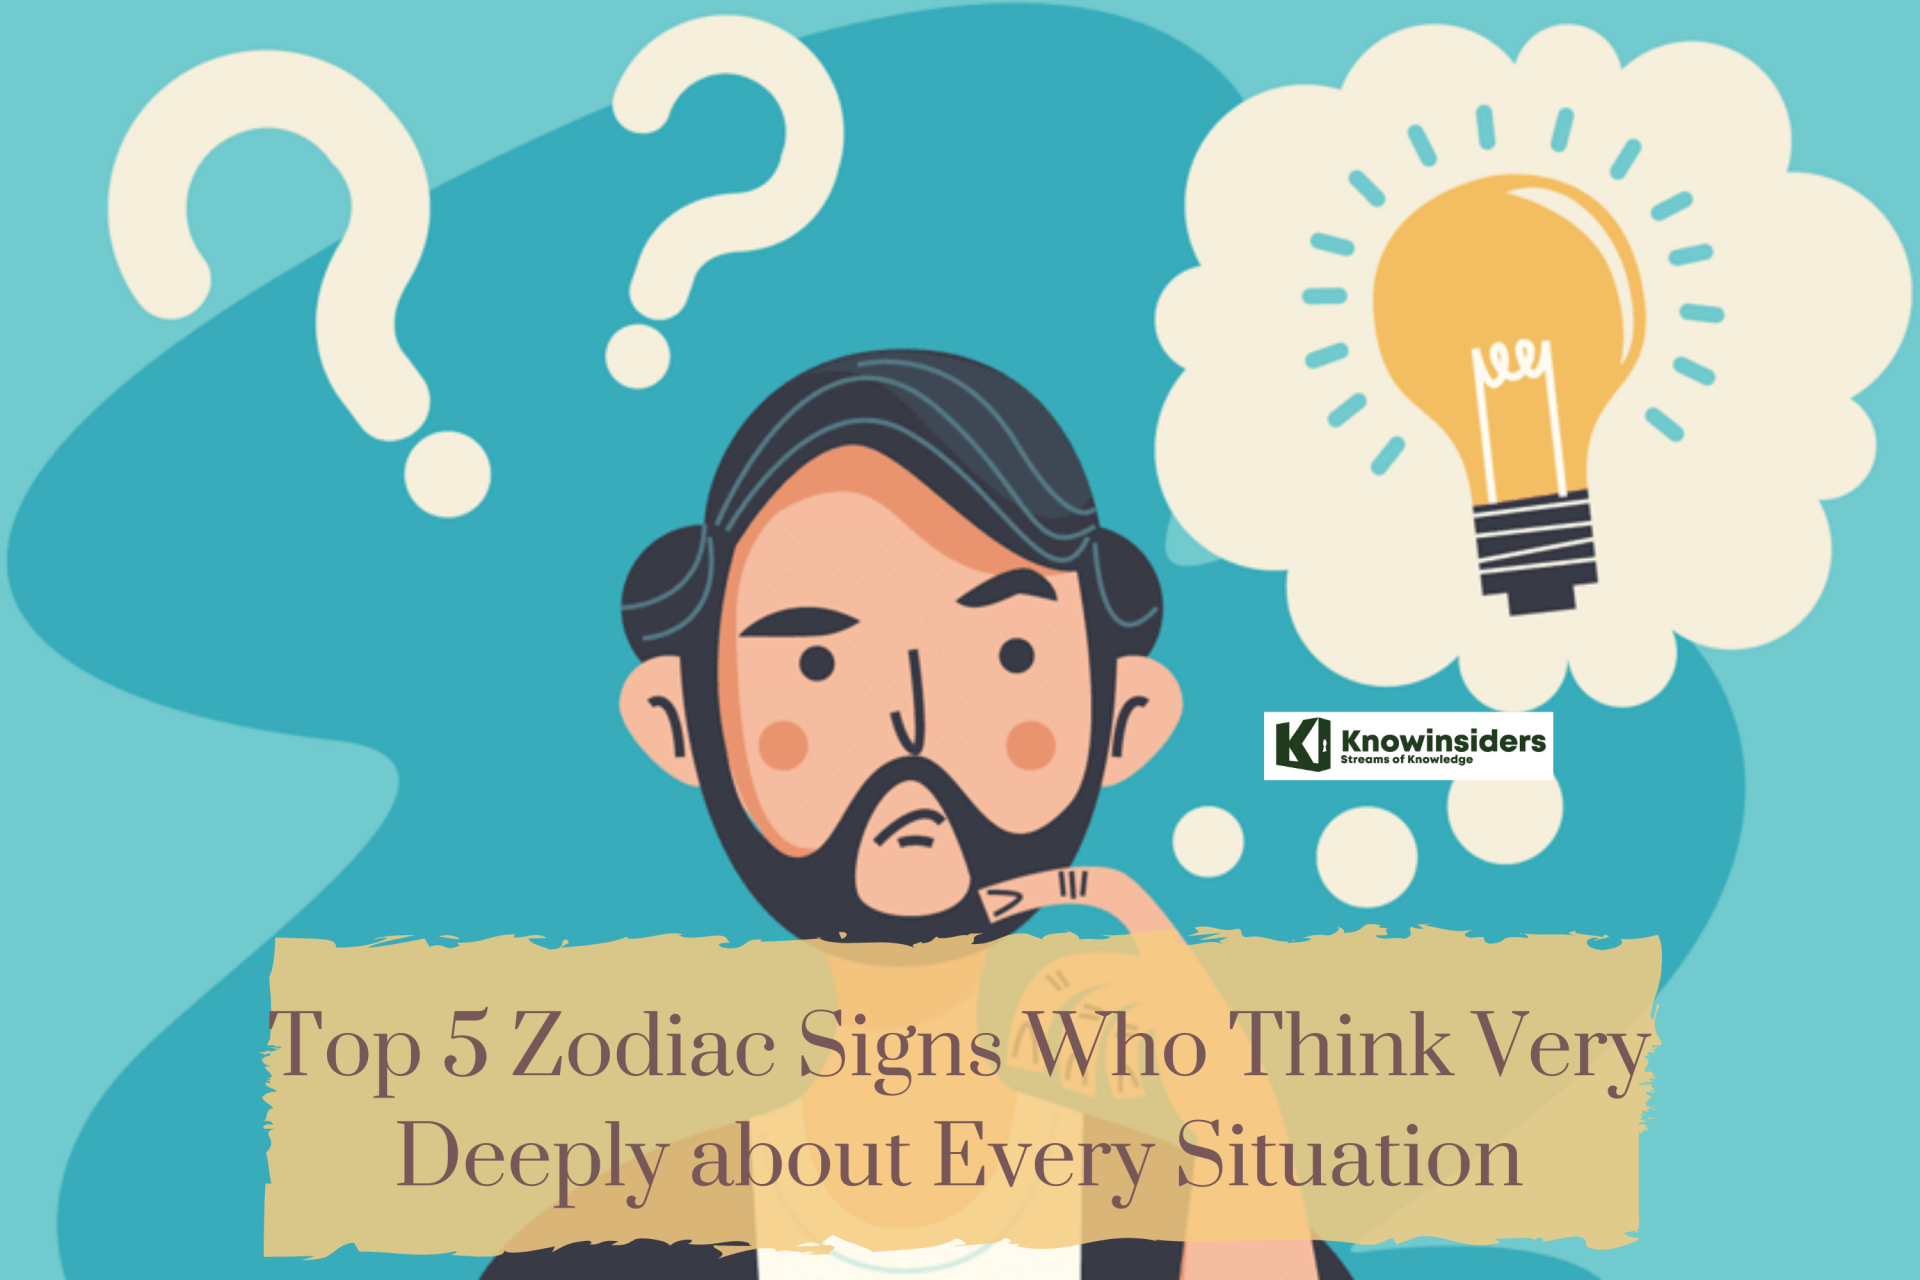 Top 5 Zodiac Signs Who Are the Deep Thinkers